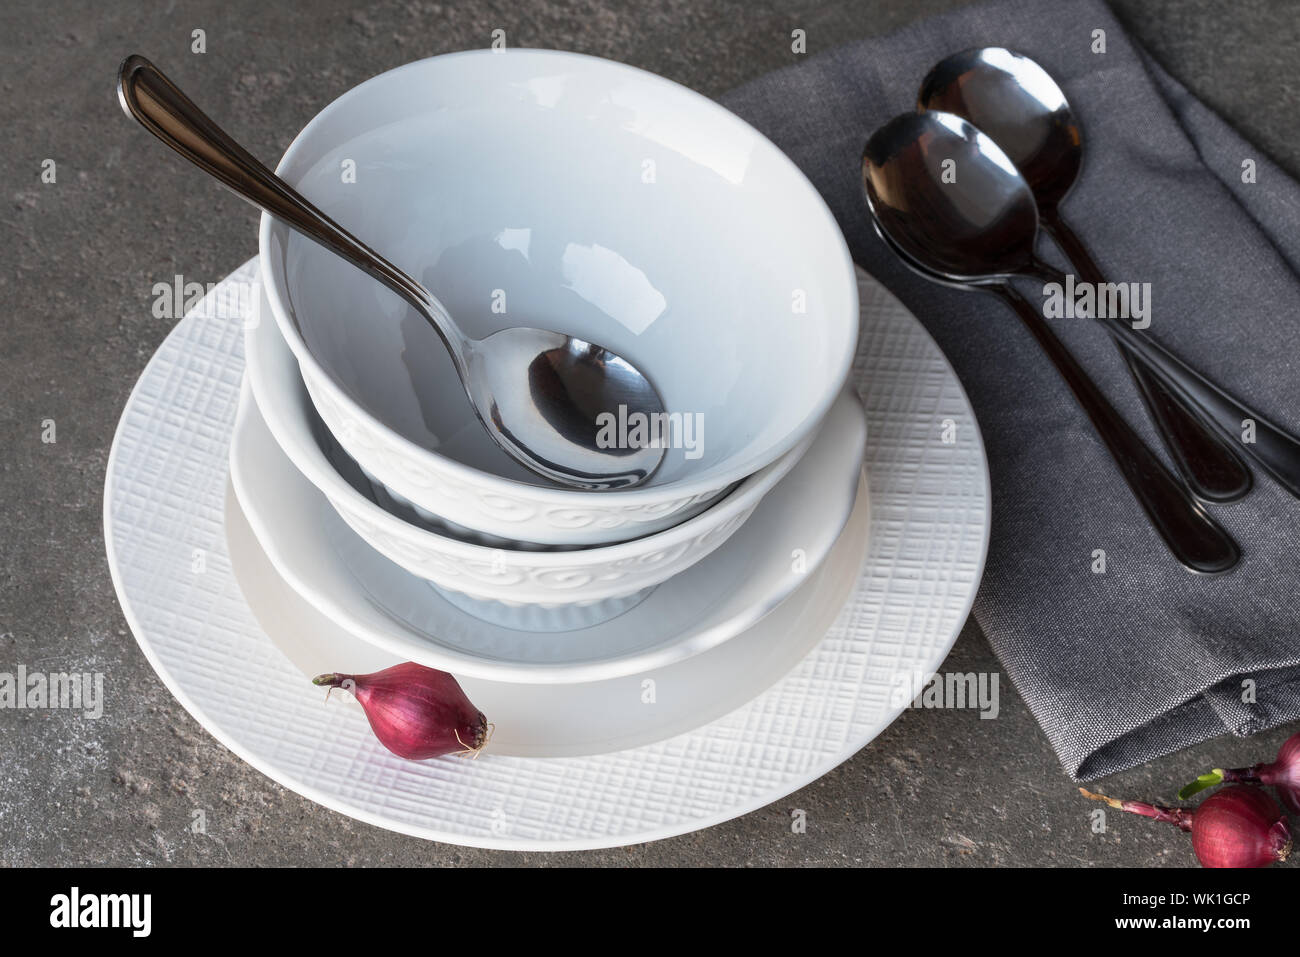 High Angle View Of Empty Bowls And Plate On Table Stock Photo